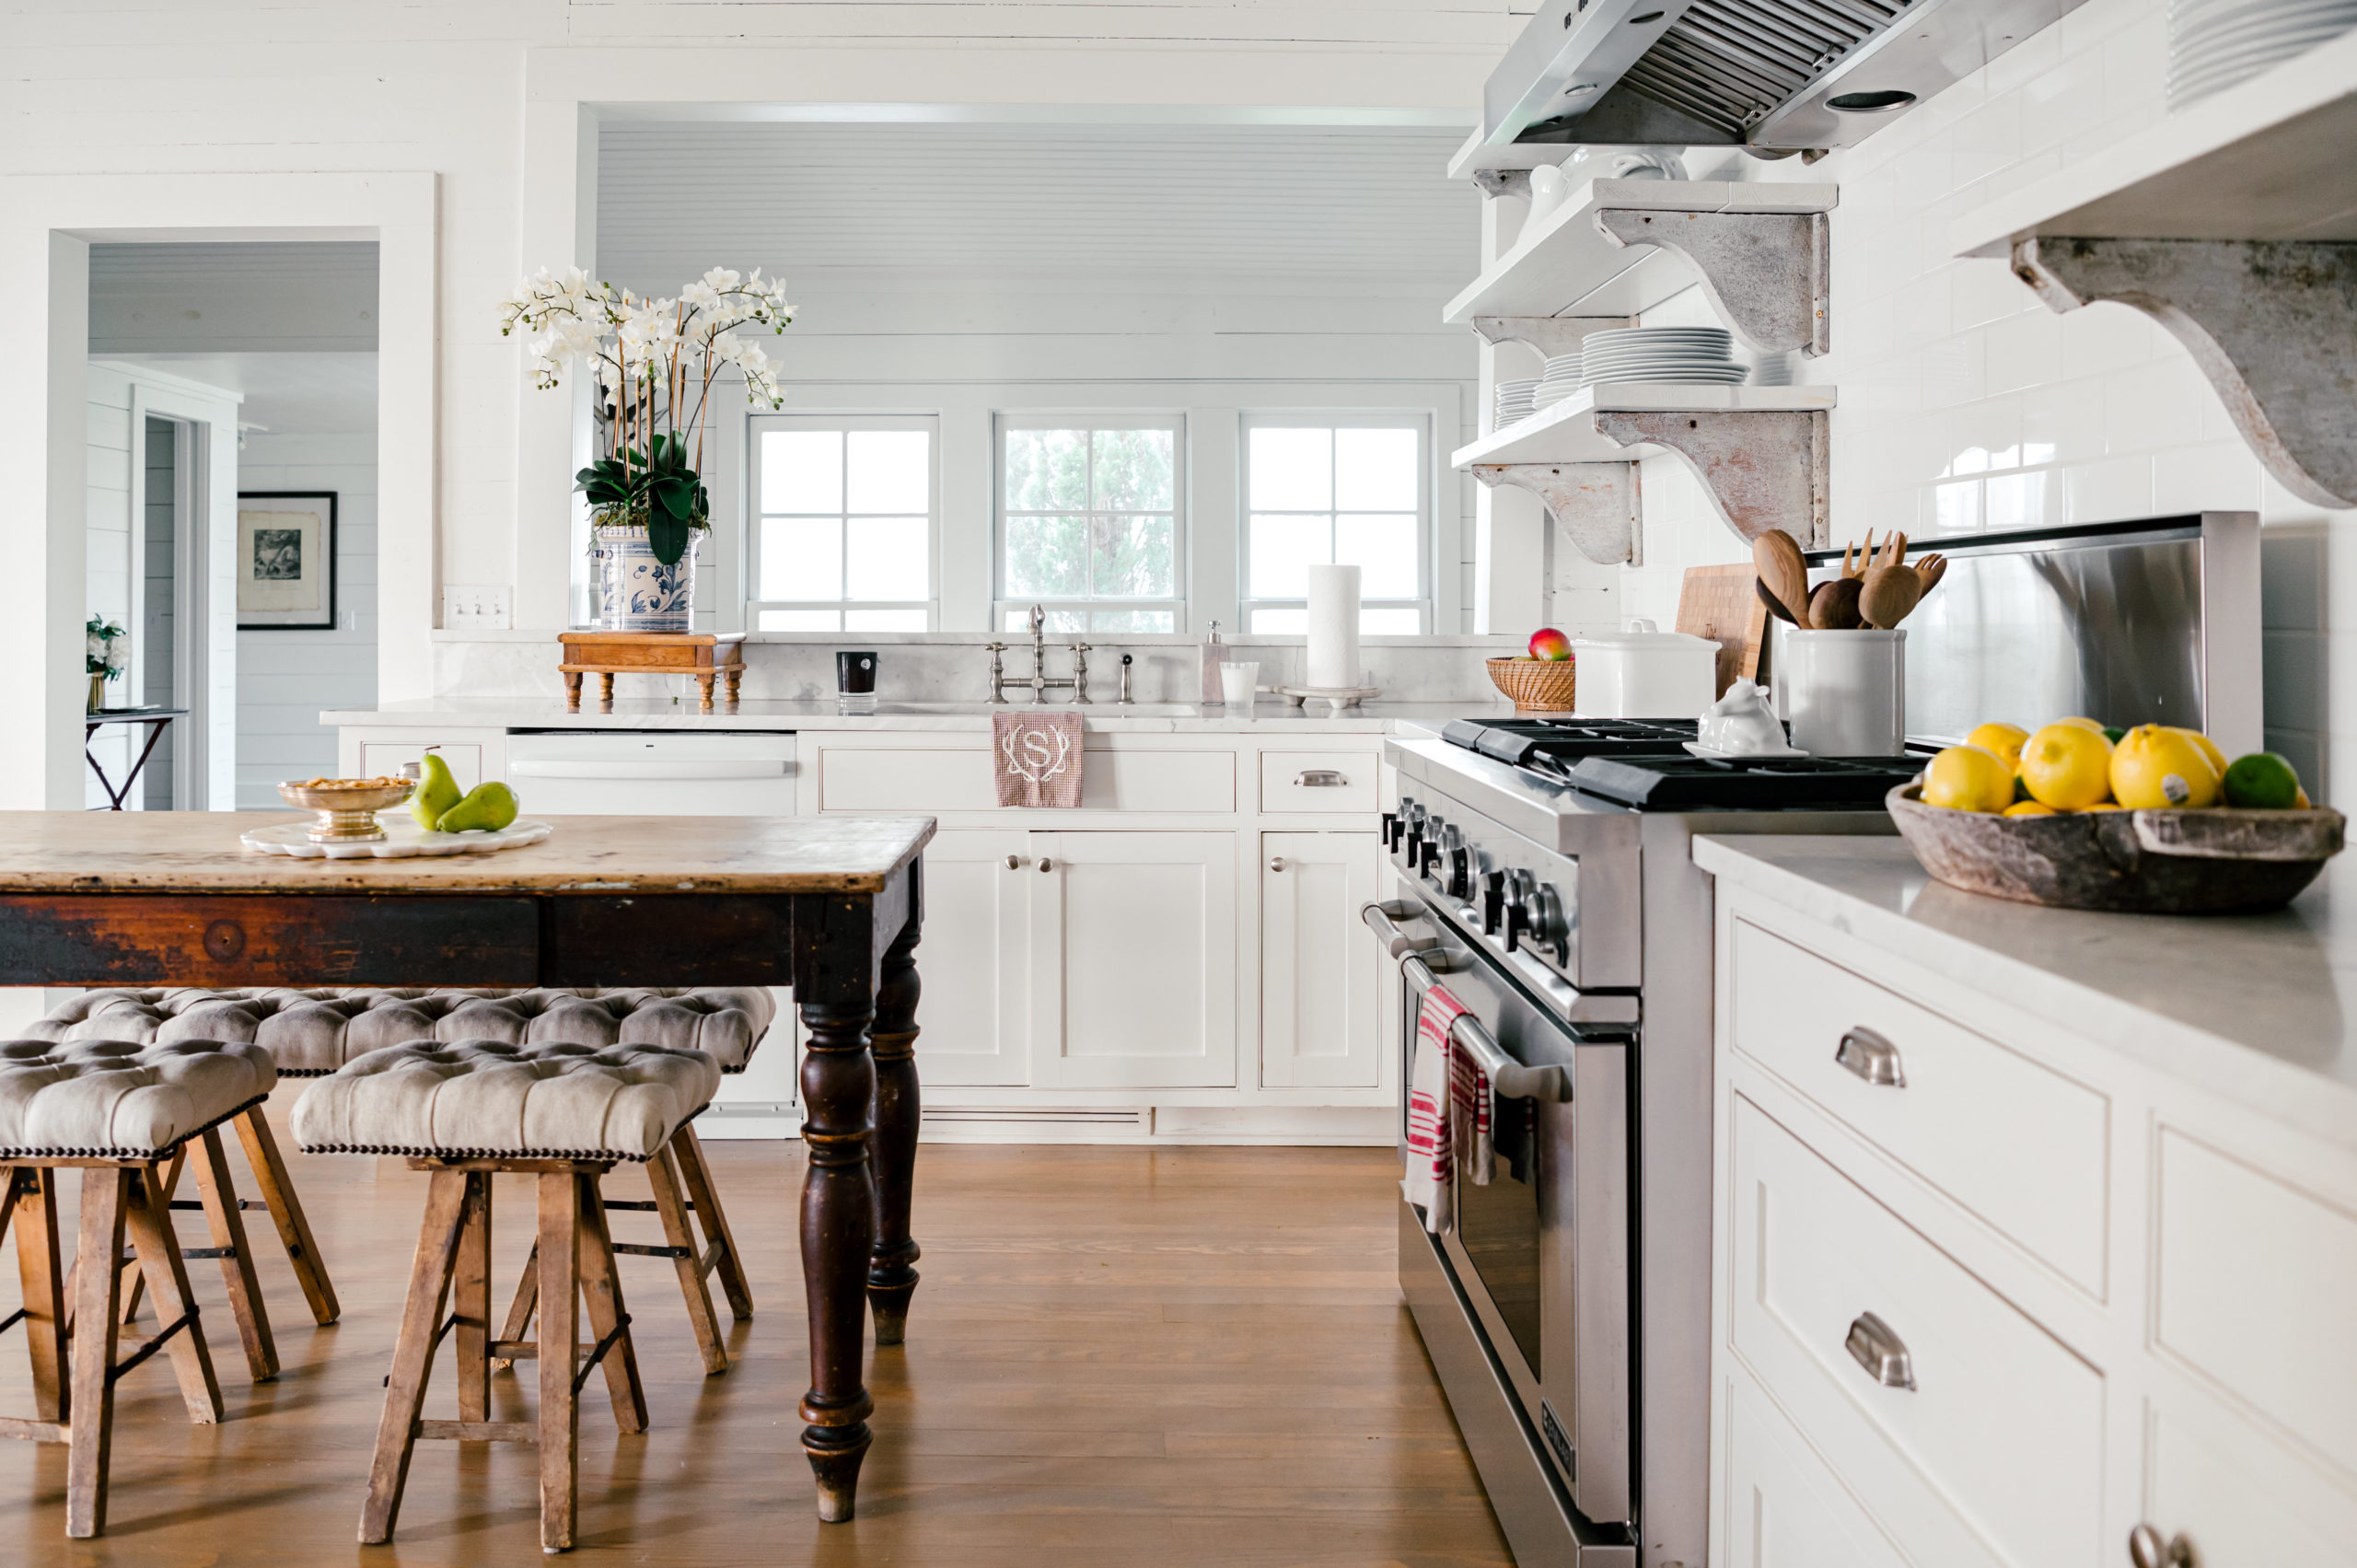 Interior Photography of a beautiful Farm house kitchen with white cabinets and a wooden island and chairs